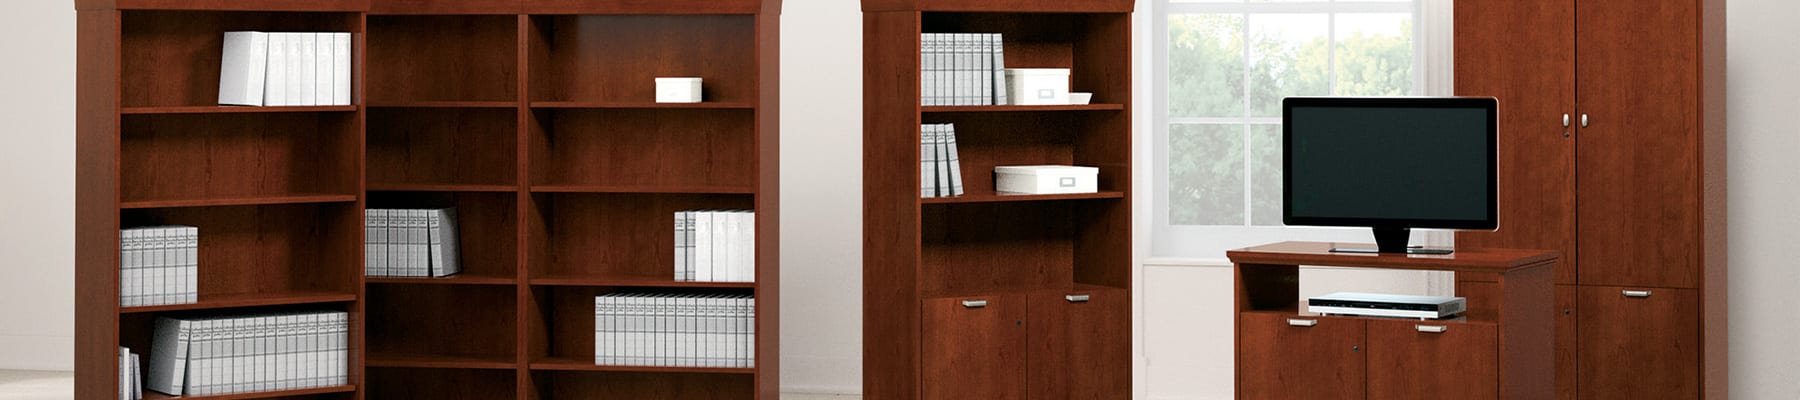 filing cabinets storge